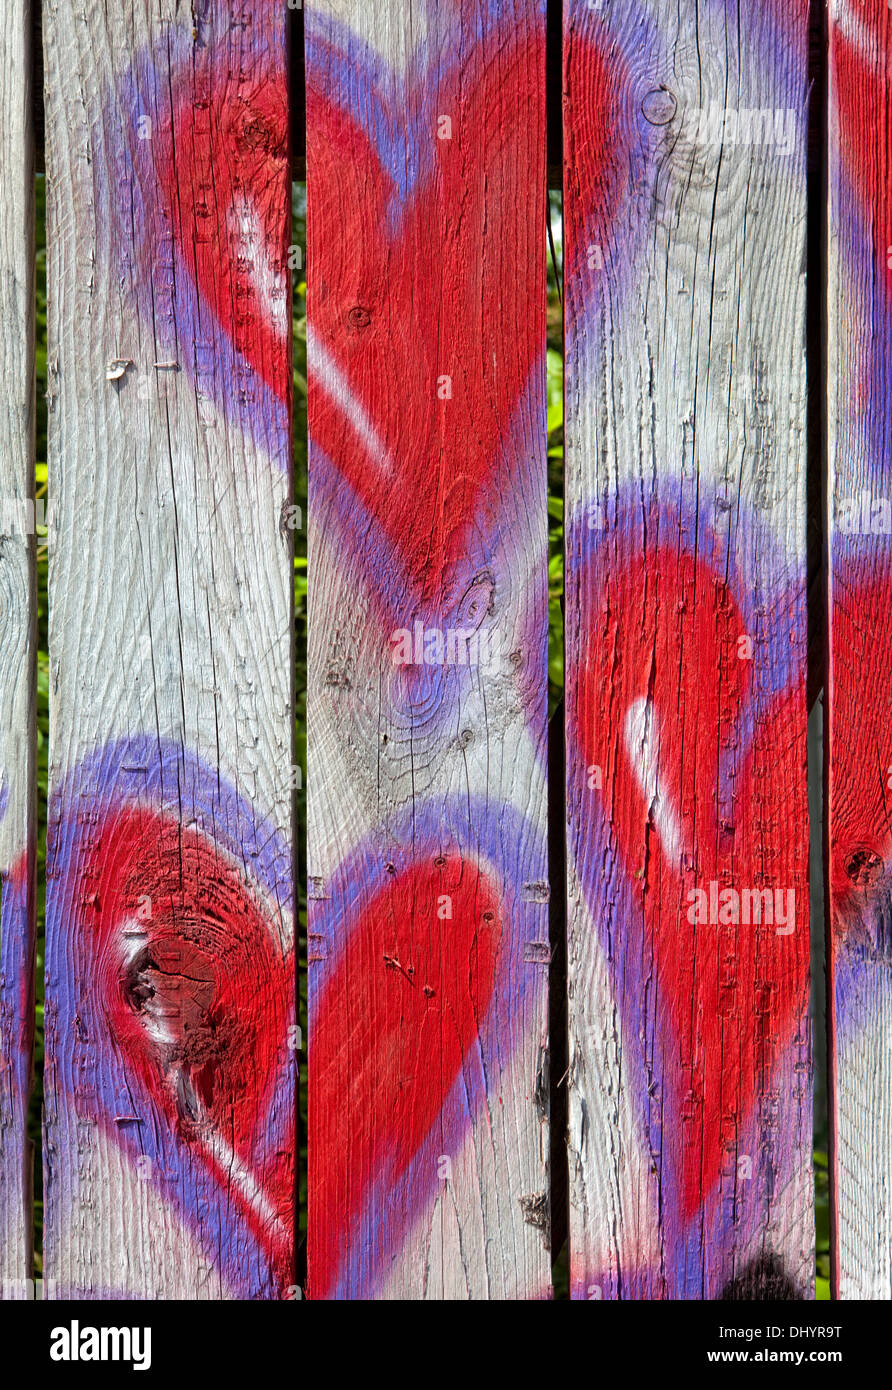 Red hearts painted on a fence, graffiti, Germany, Europe Stock Photo